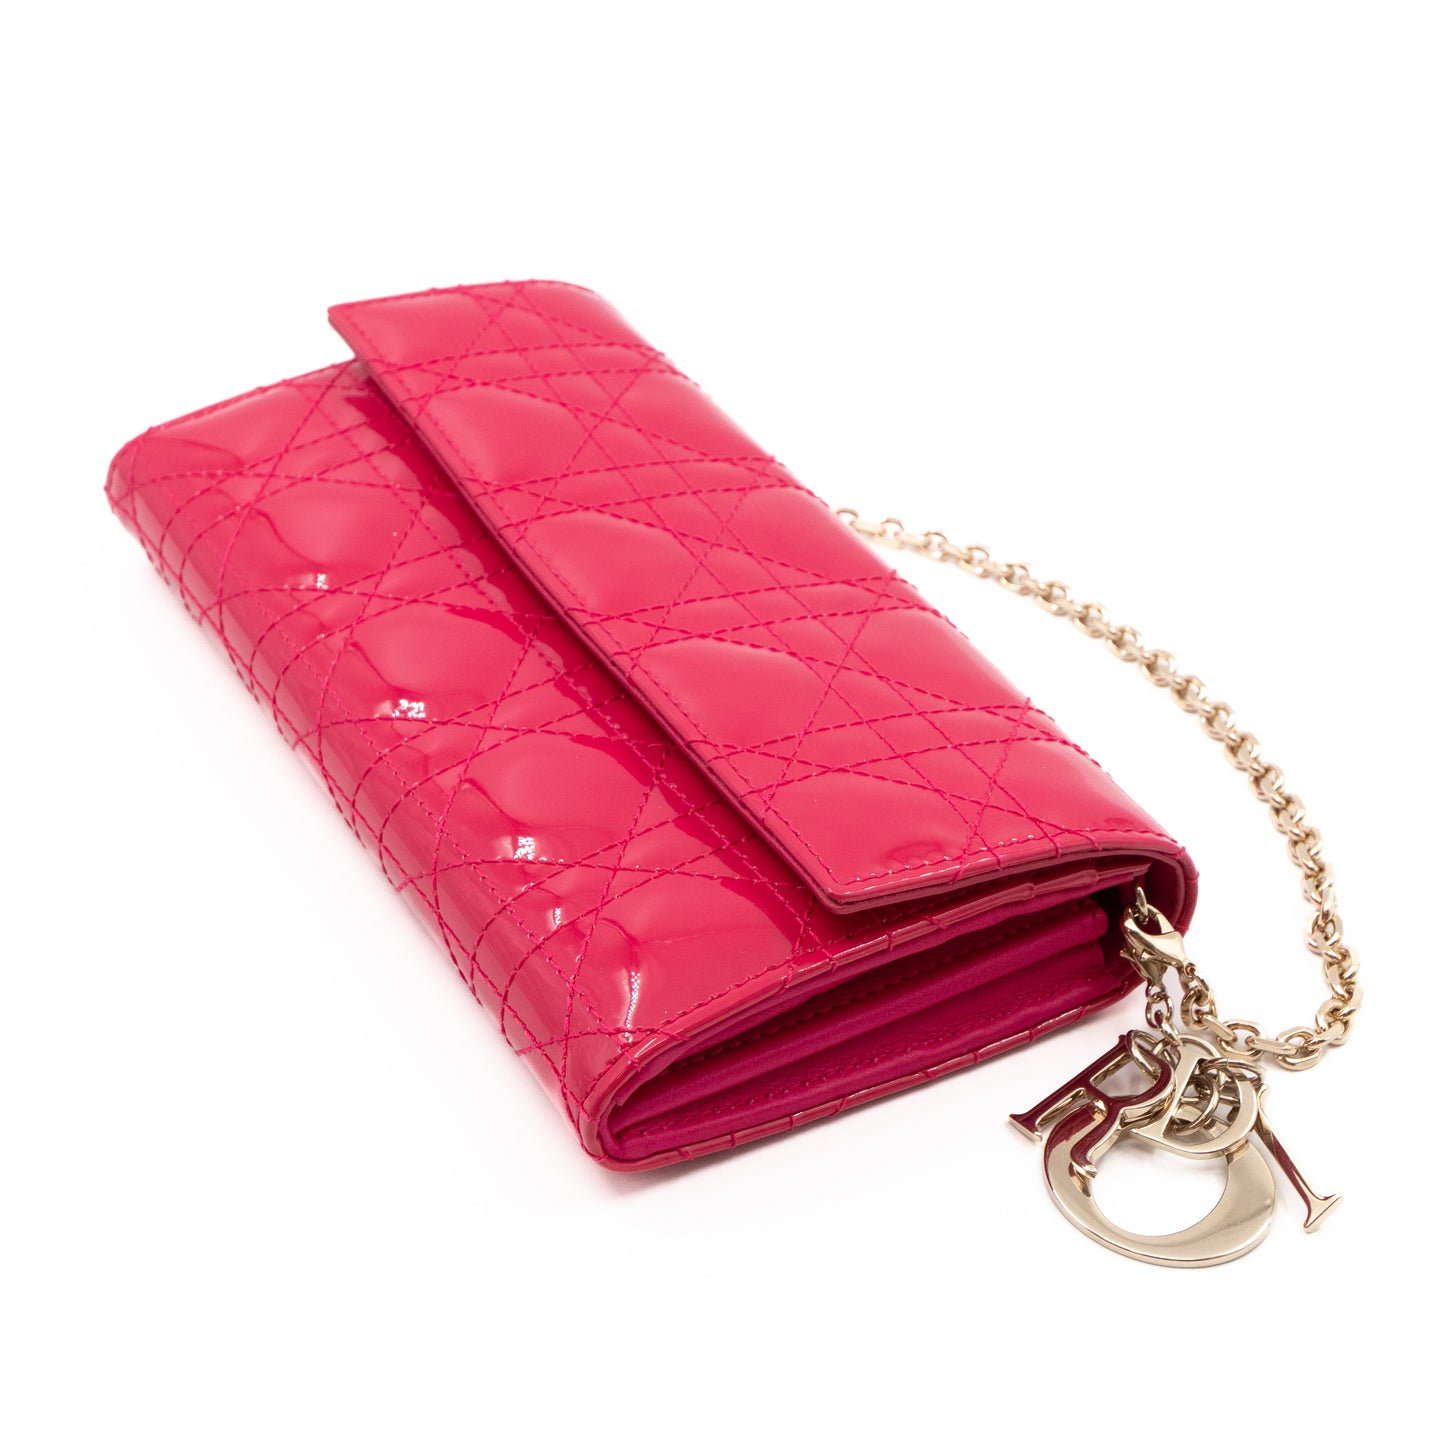 Lady Dior Wallet on Chain Pink Patent Leather